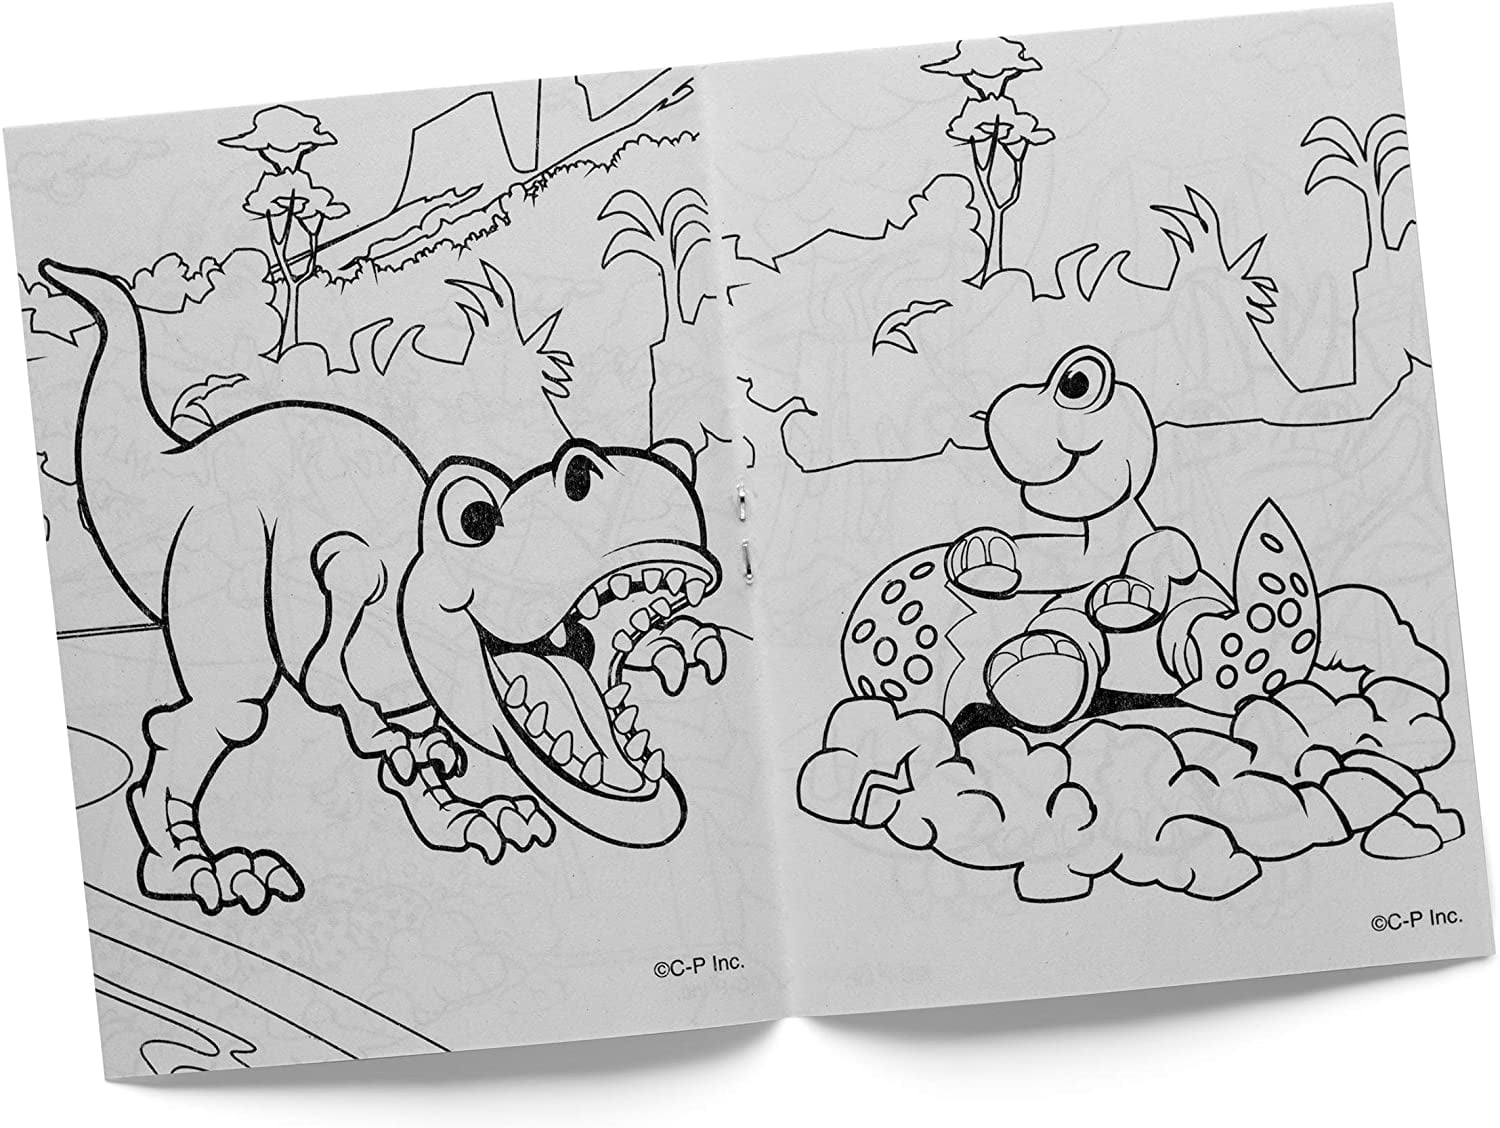 Bulk Mini Dinosaur Coloring Books Pack Of 24 For Birthday Party,Dinosaur Themed Goody Bag Filler Dino Designs Coloring Books And Crayons With 8 Premium Color Crayons